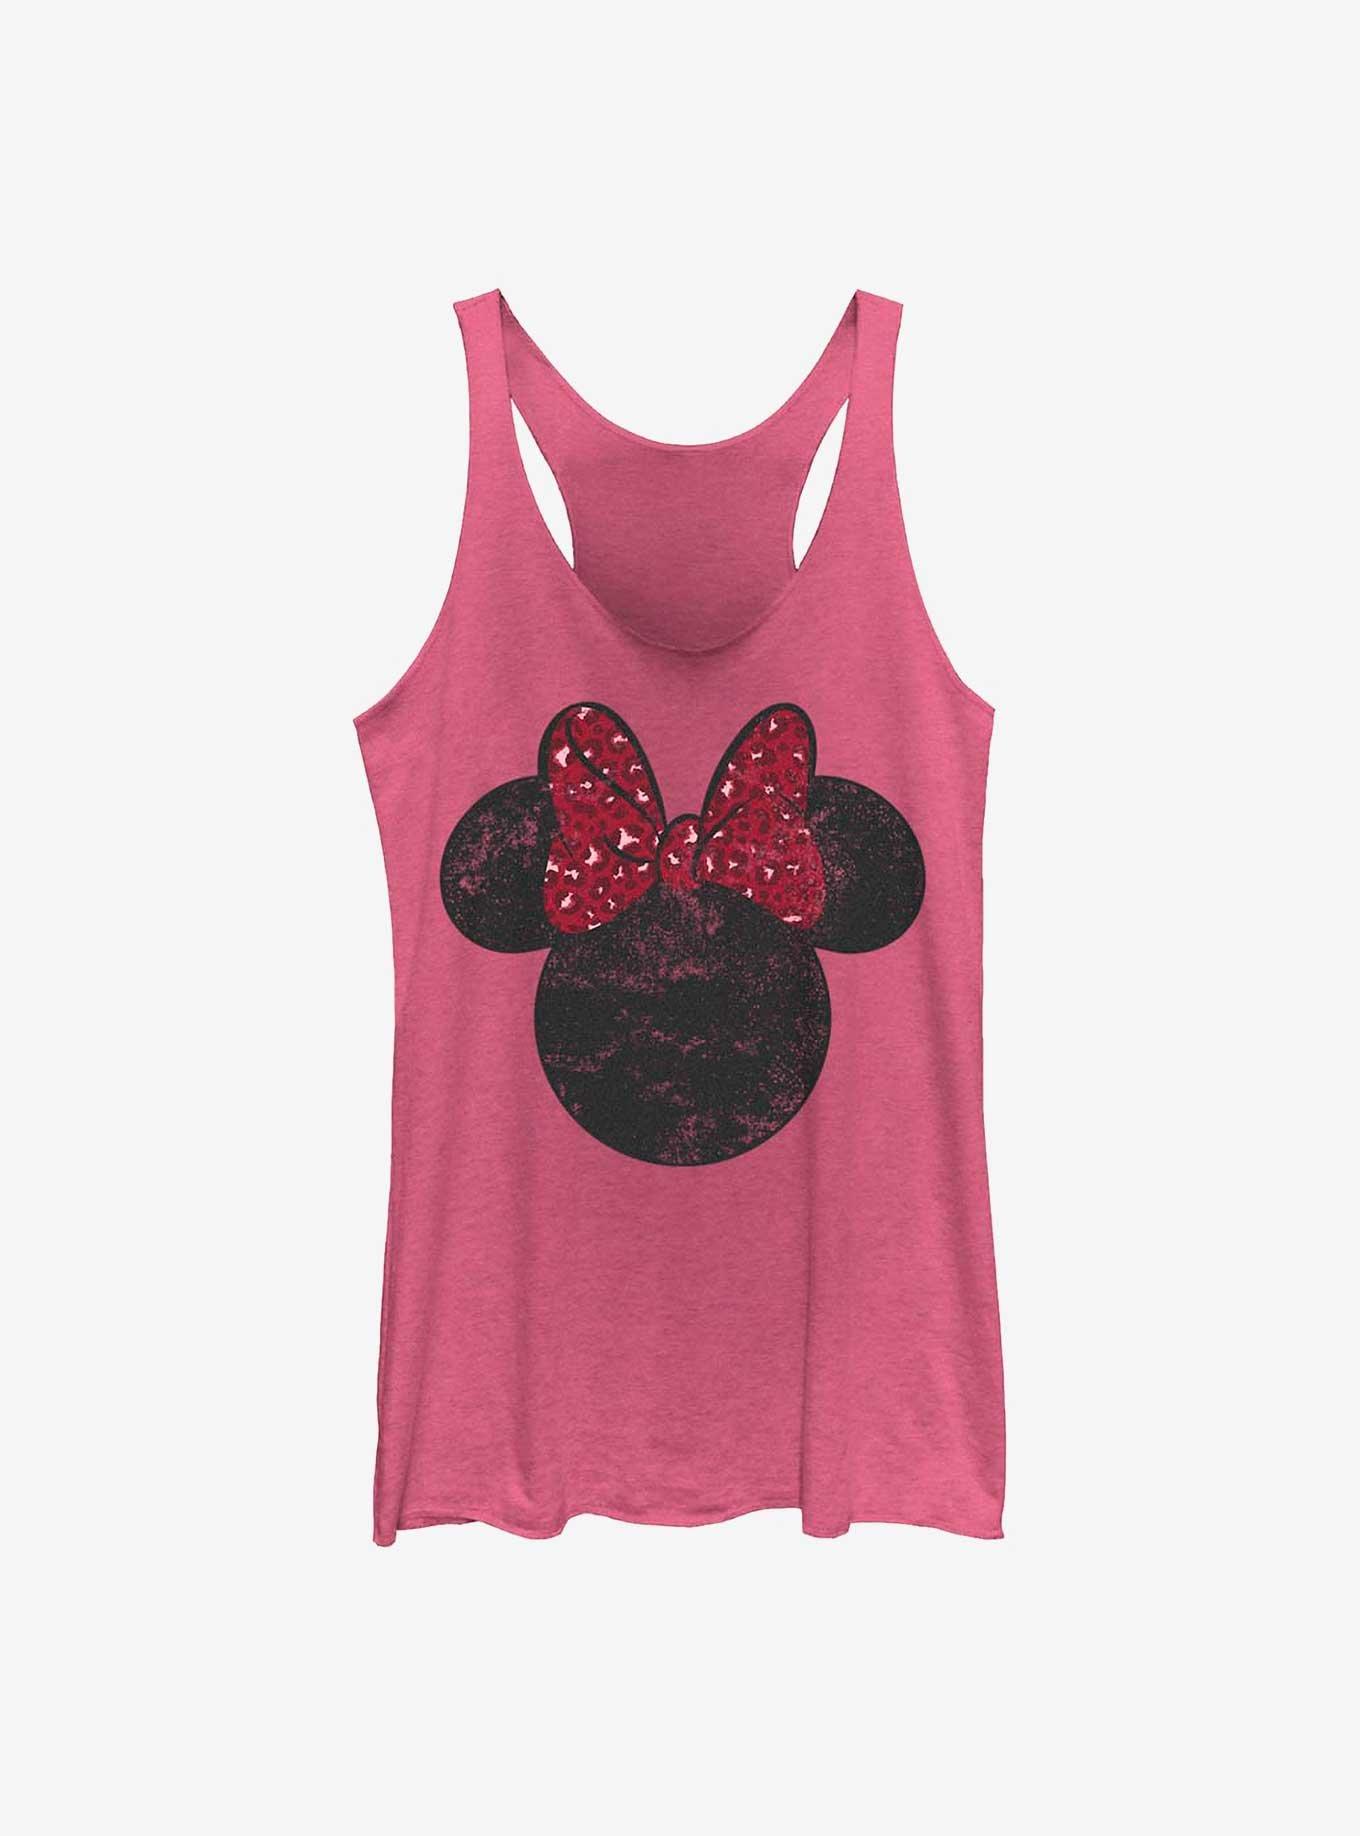 Disney Minnie Mouse Leopard Bow Ears Womens Tank Top - PINK